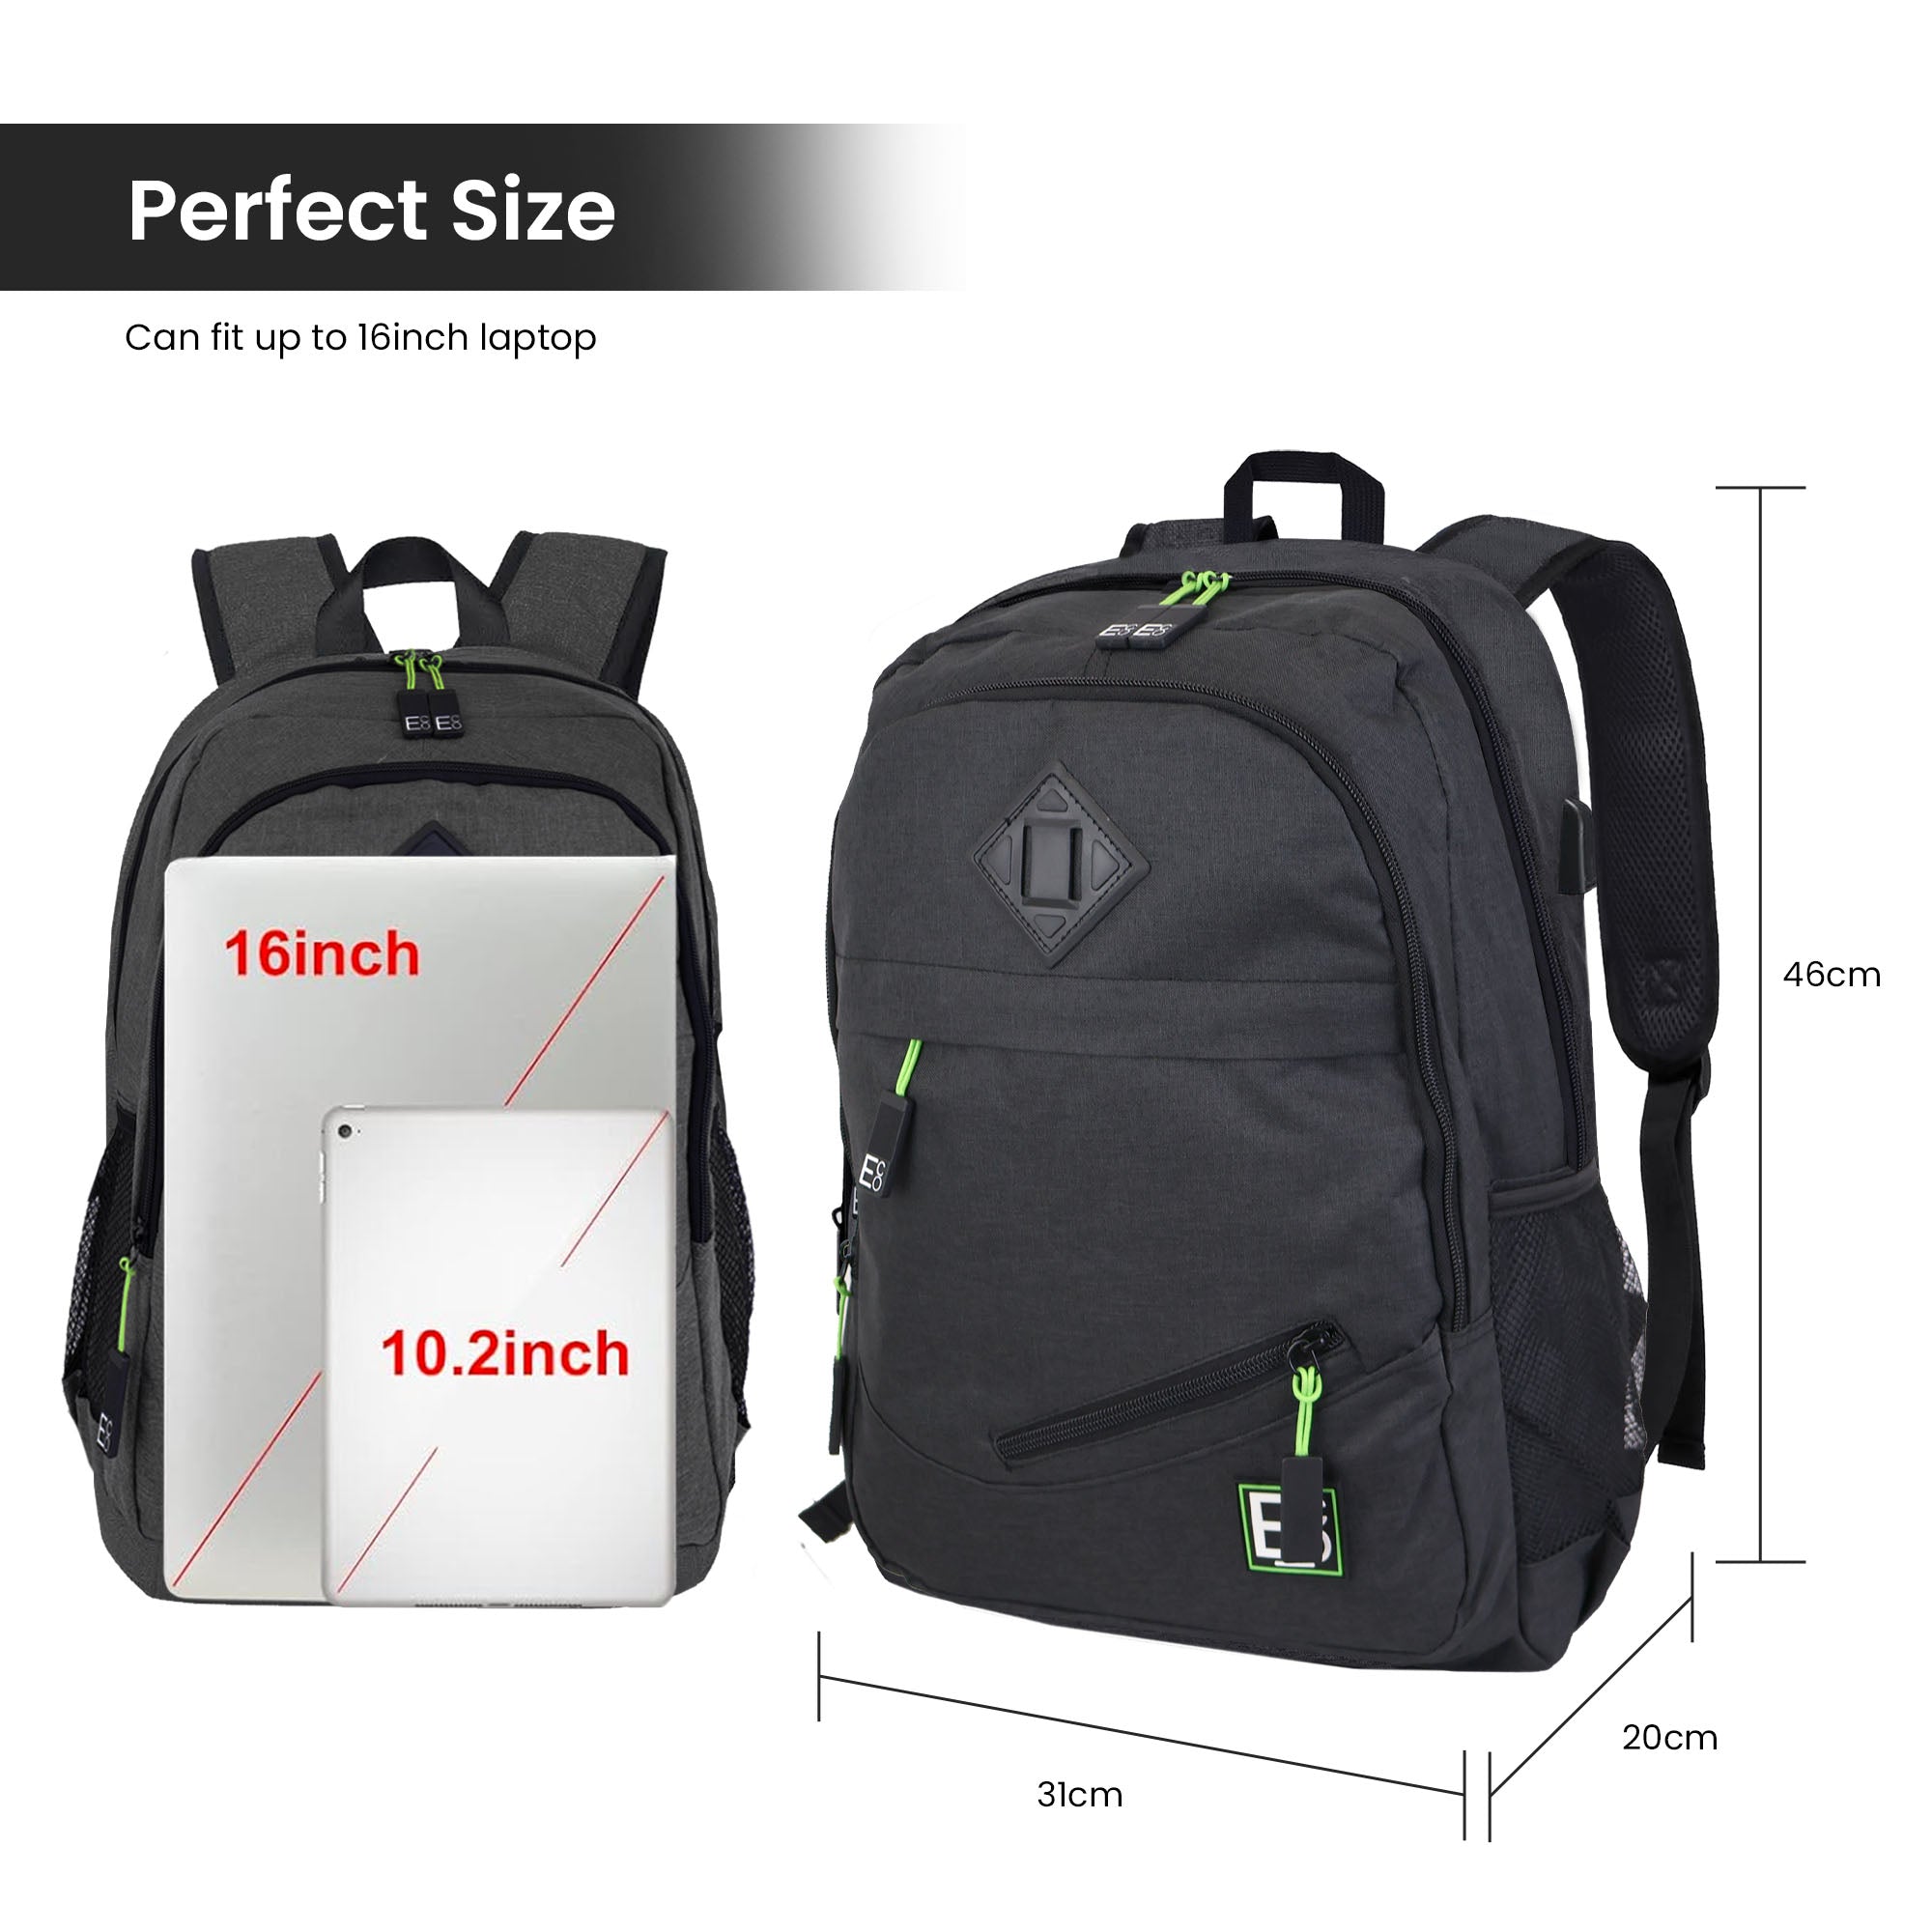 Backpack with USB Laptop and Phone Charging Port